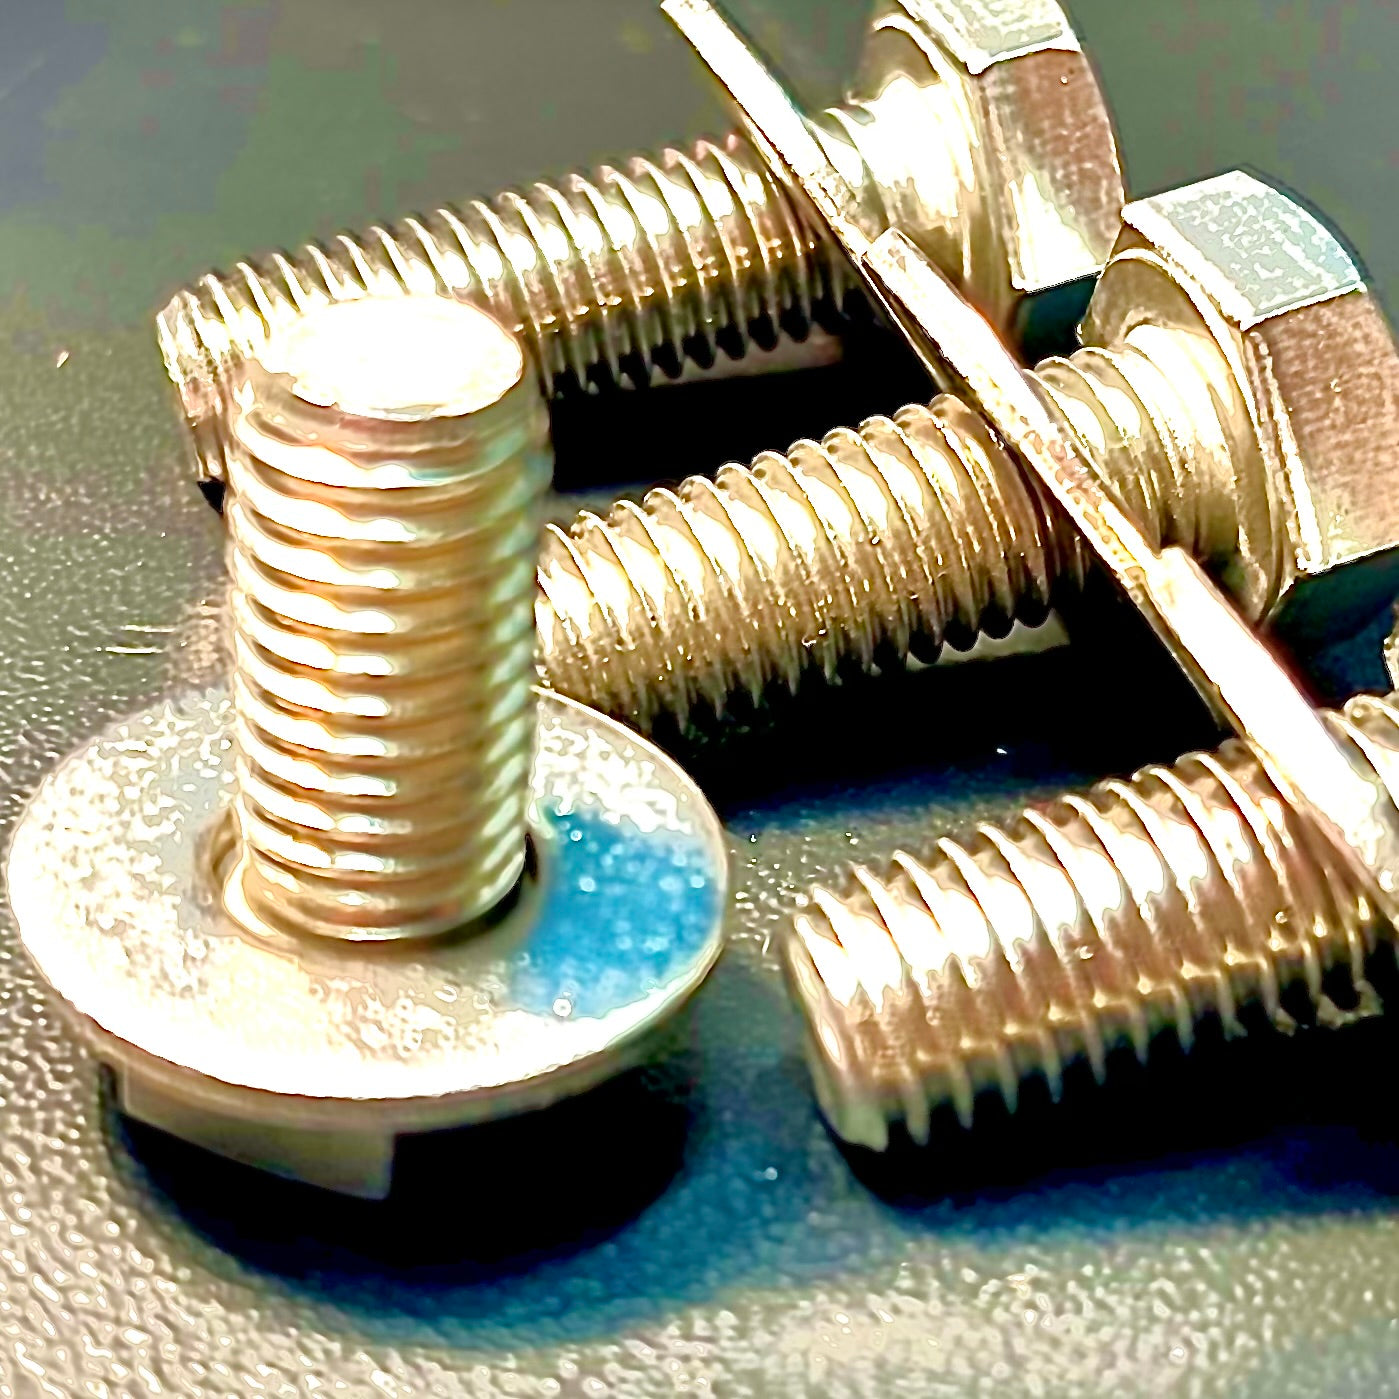 M10x60mm-100mm Hex Set Screw plus Washer A2 304 Stainless Steel - Fixaball Ltd. Fixings and Fasteners UK